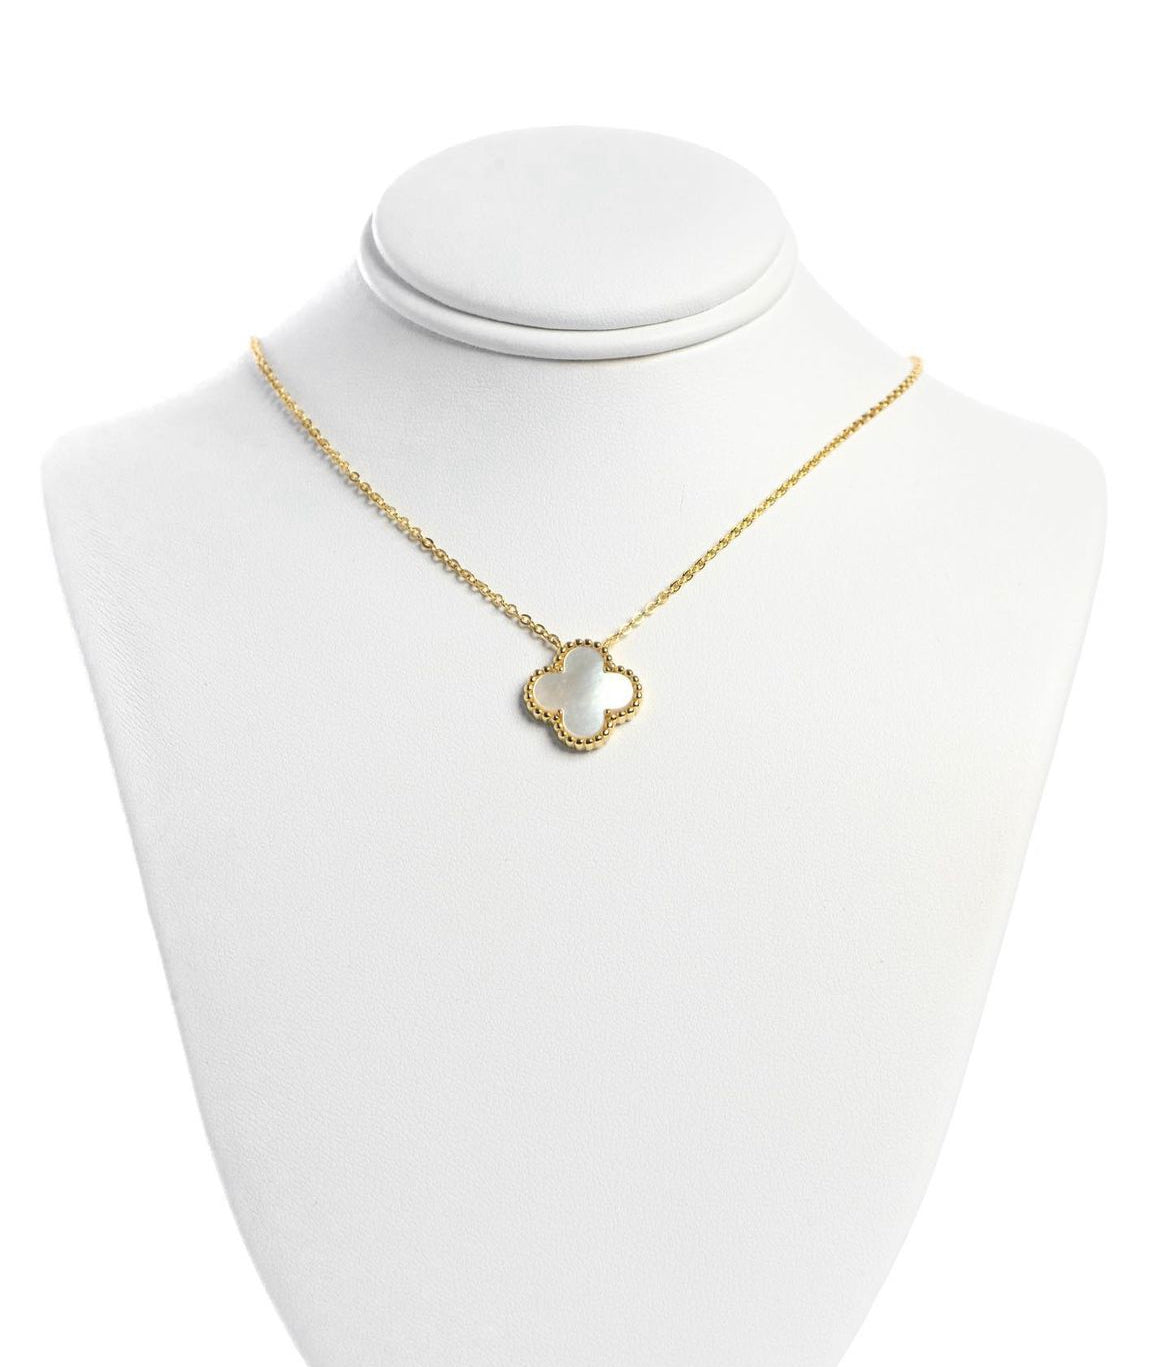 Bia Clover Necklace